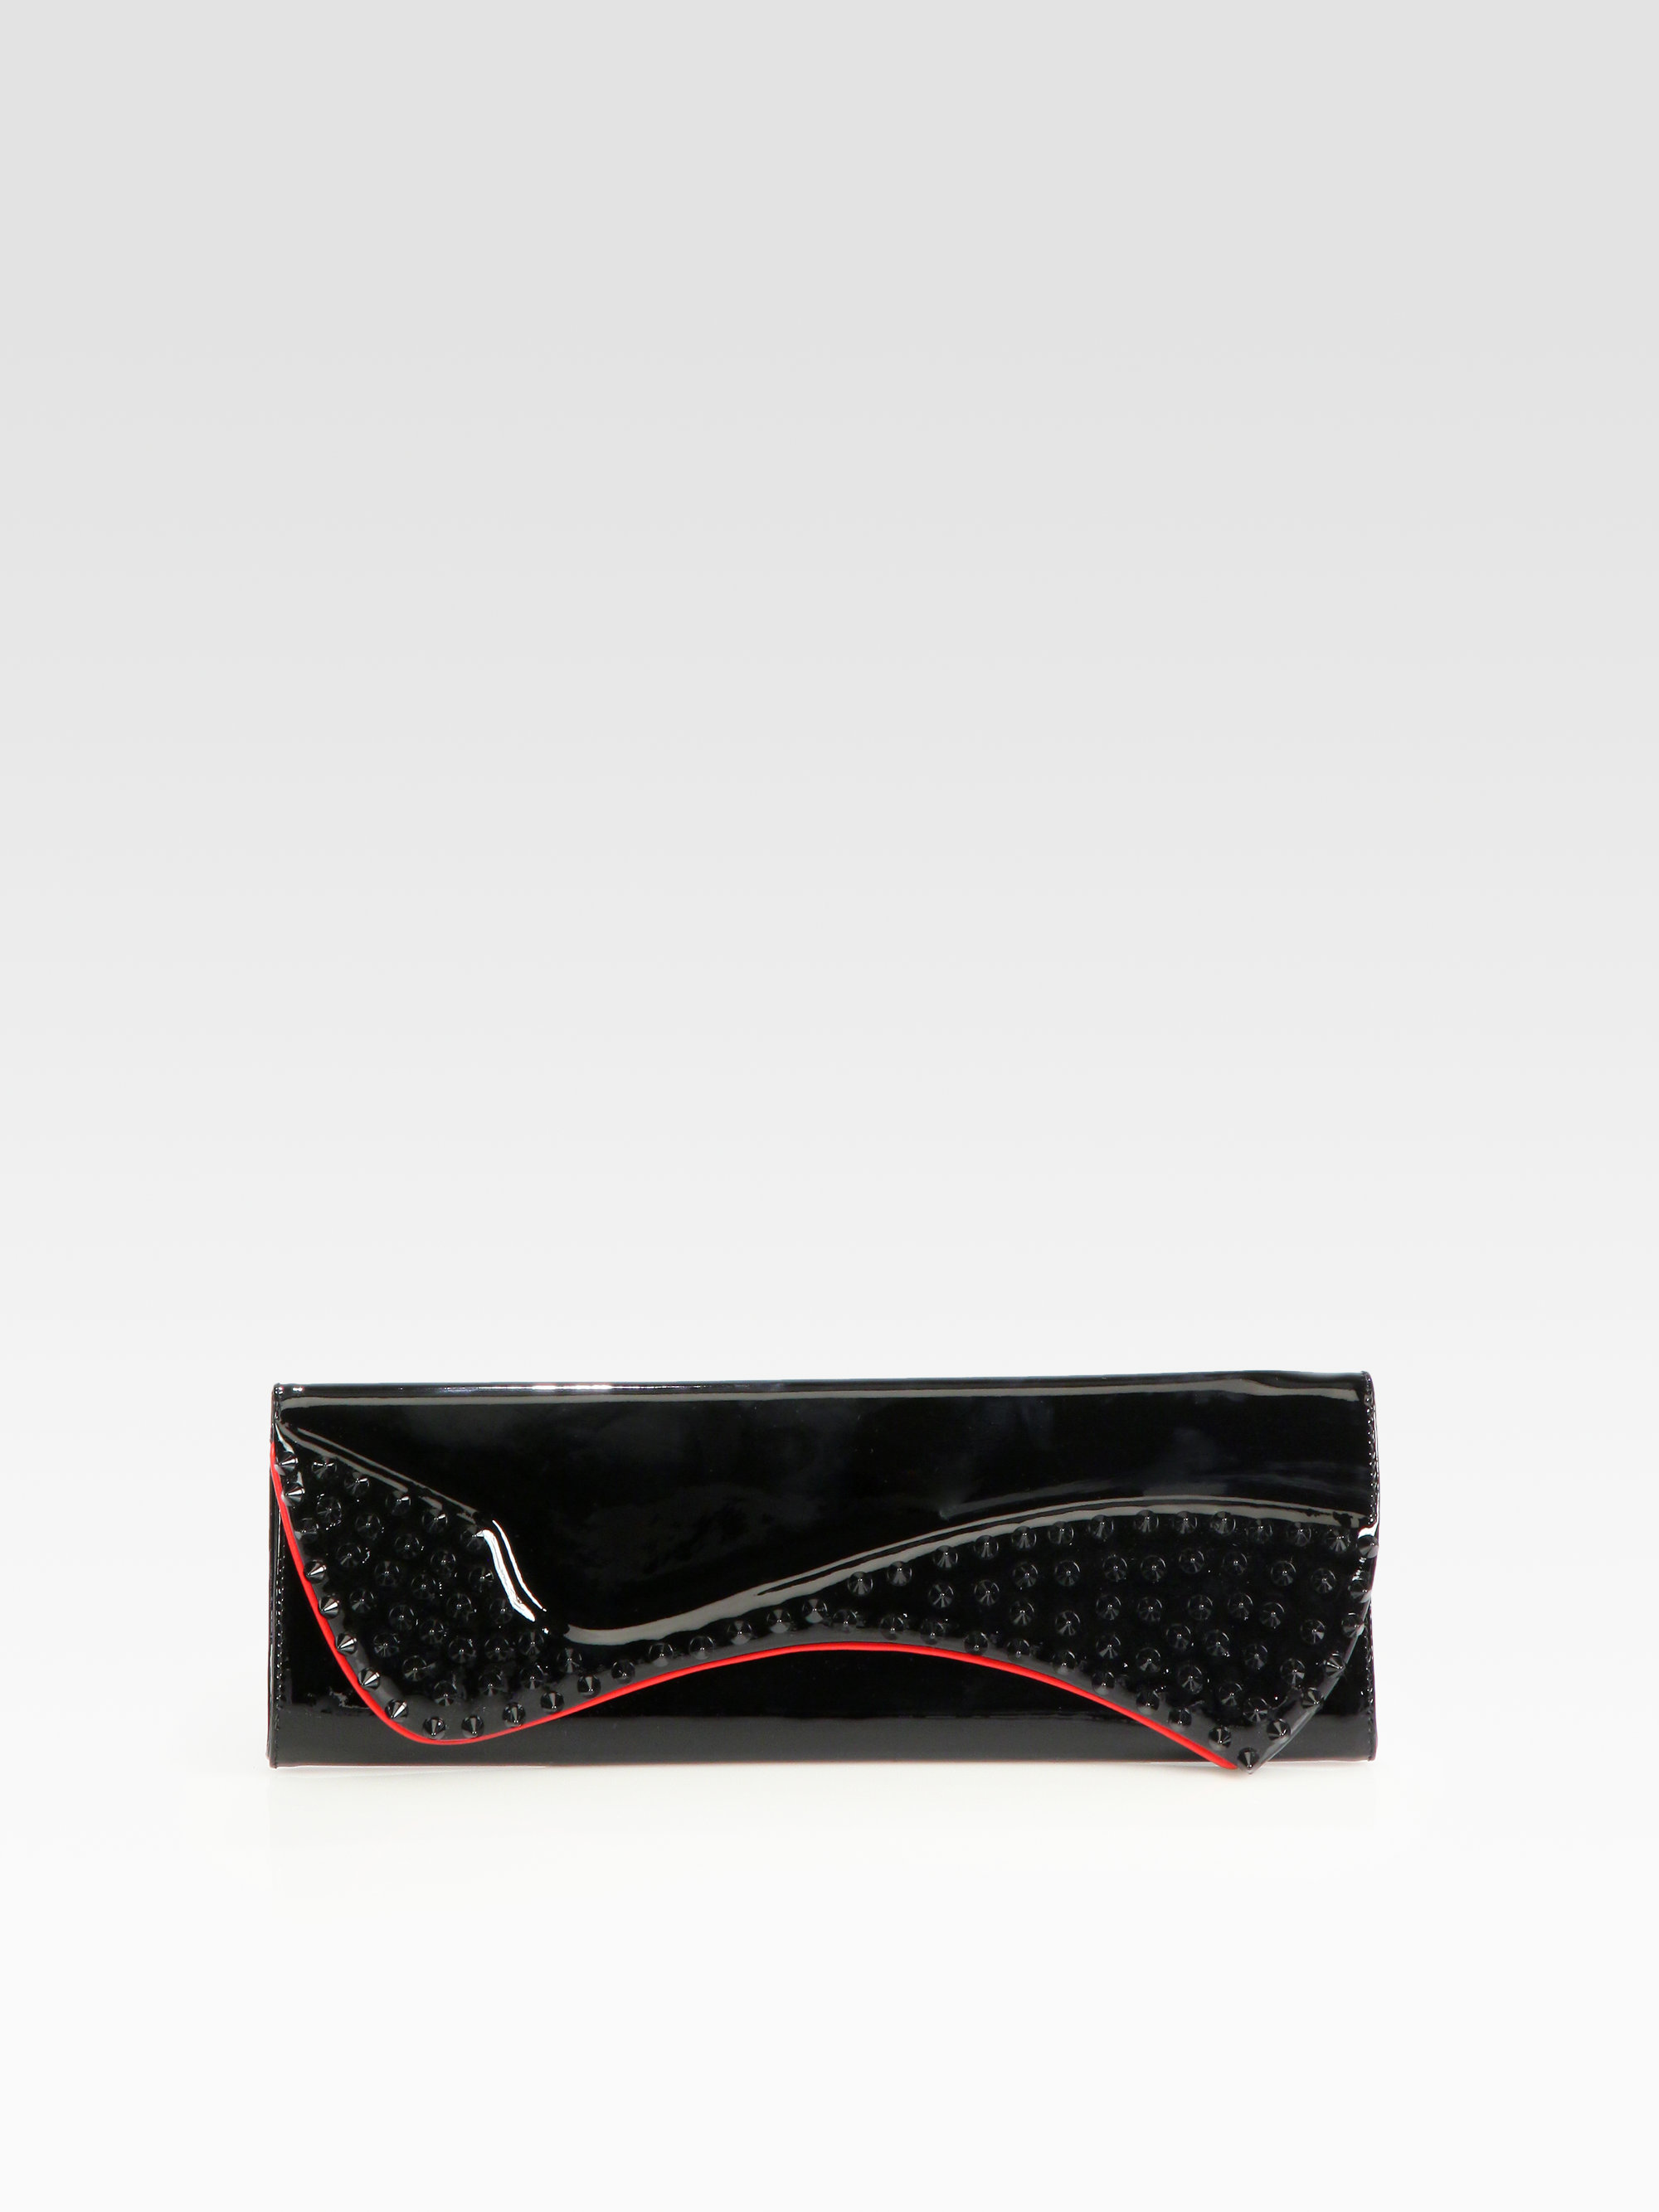 louboutin pigalle clutch